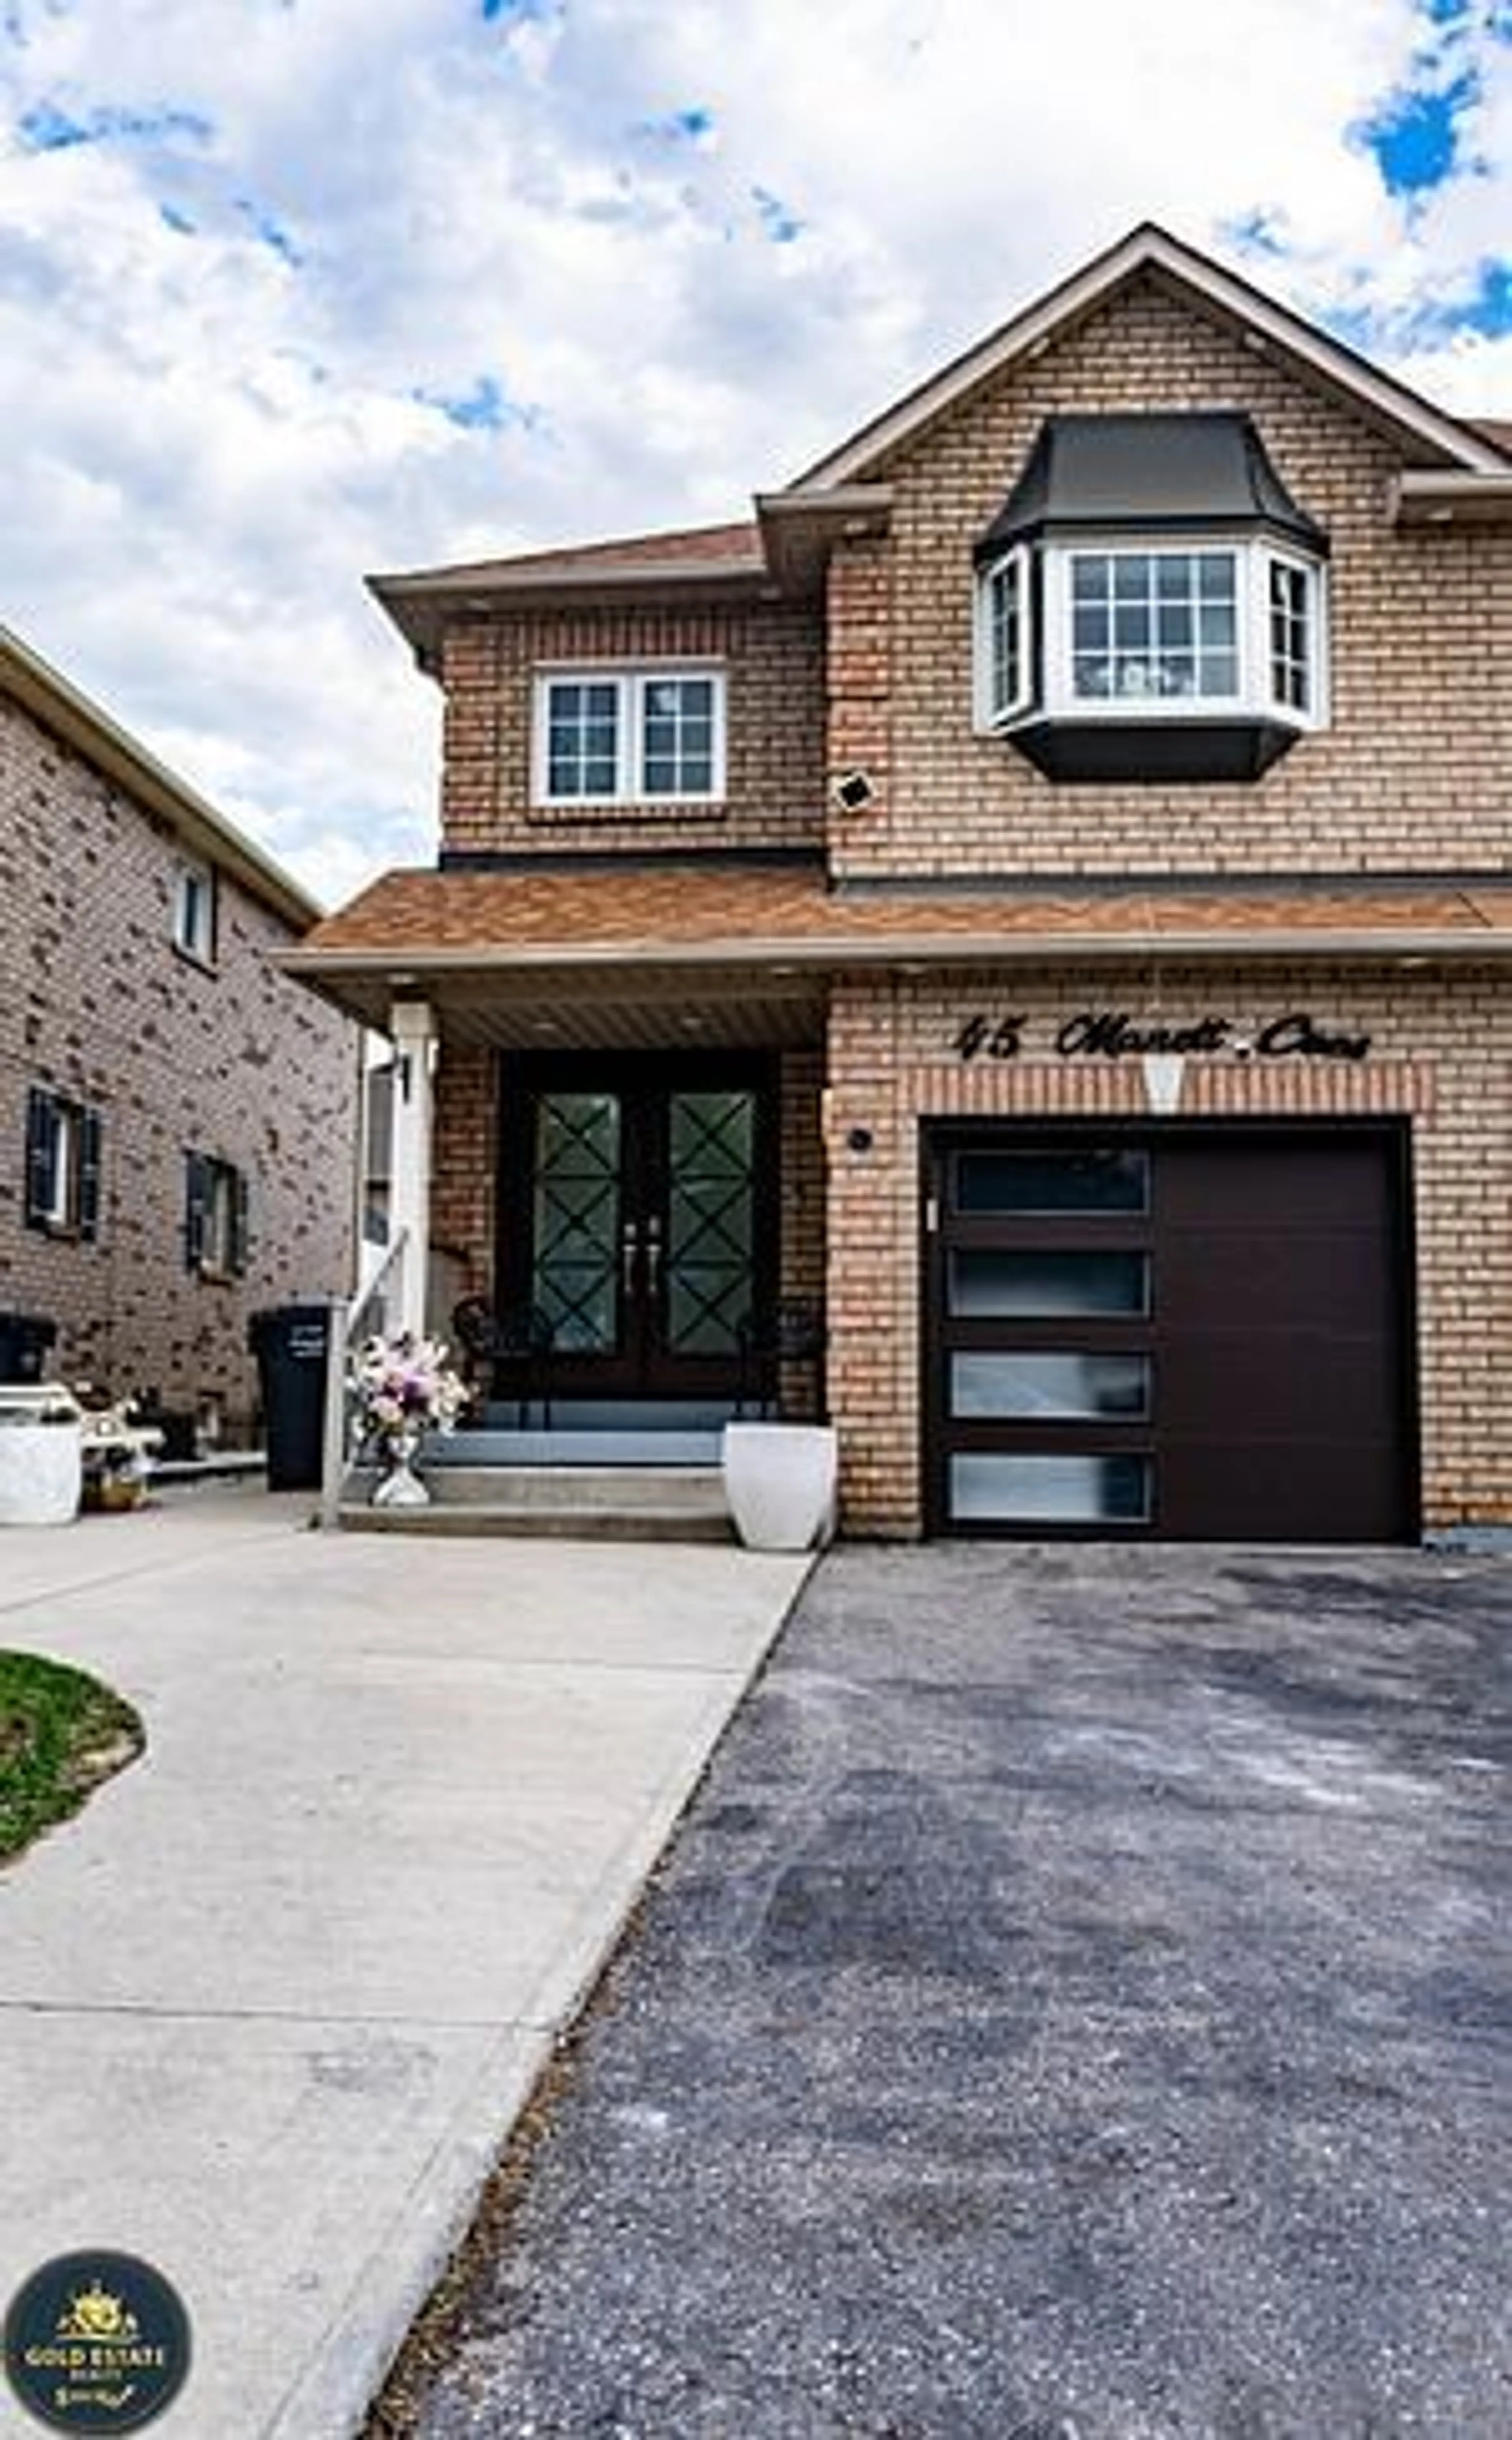 Home with brick exterior material for 45 Manett Cres, Brampton Ontario L6X 4X4